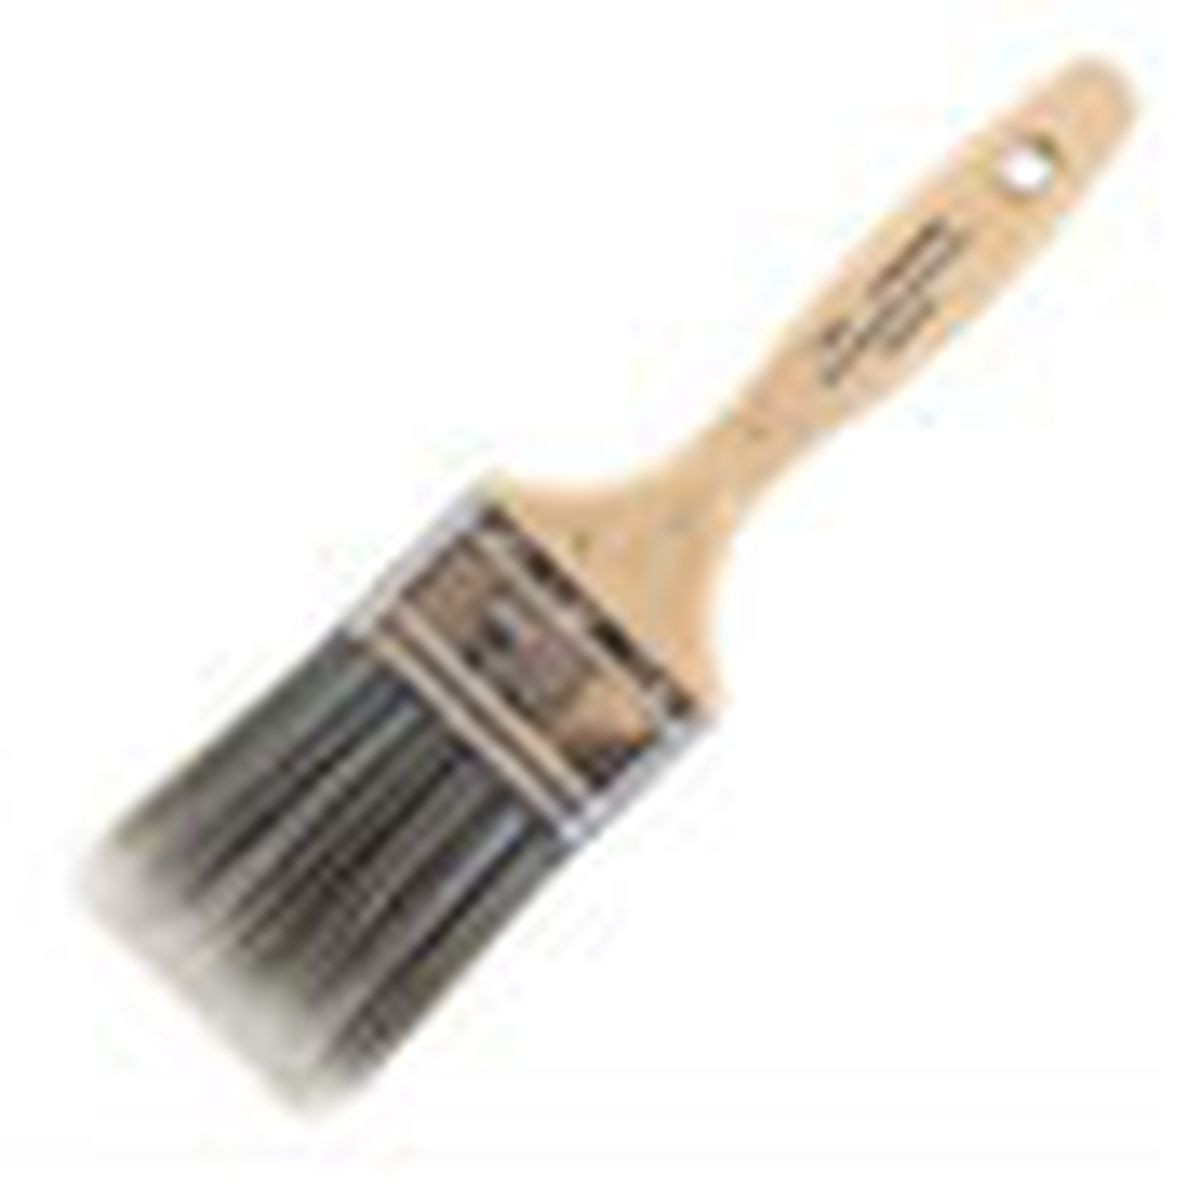 2-and-a-half-inch paintbrush